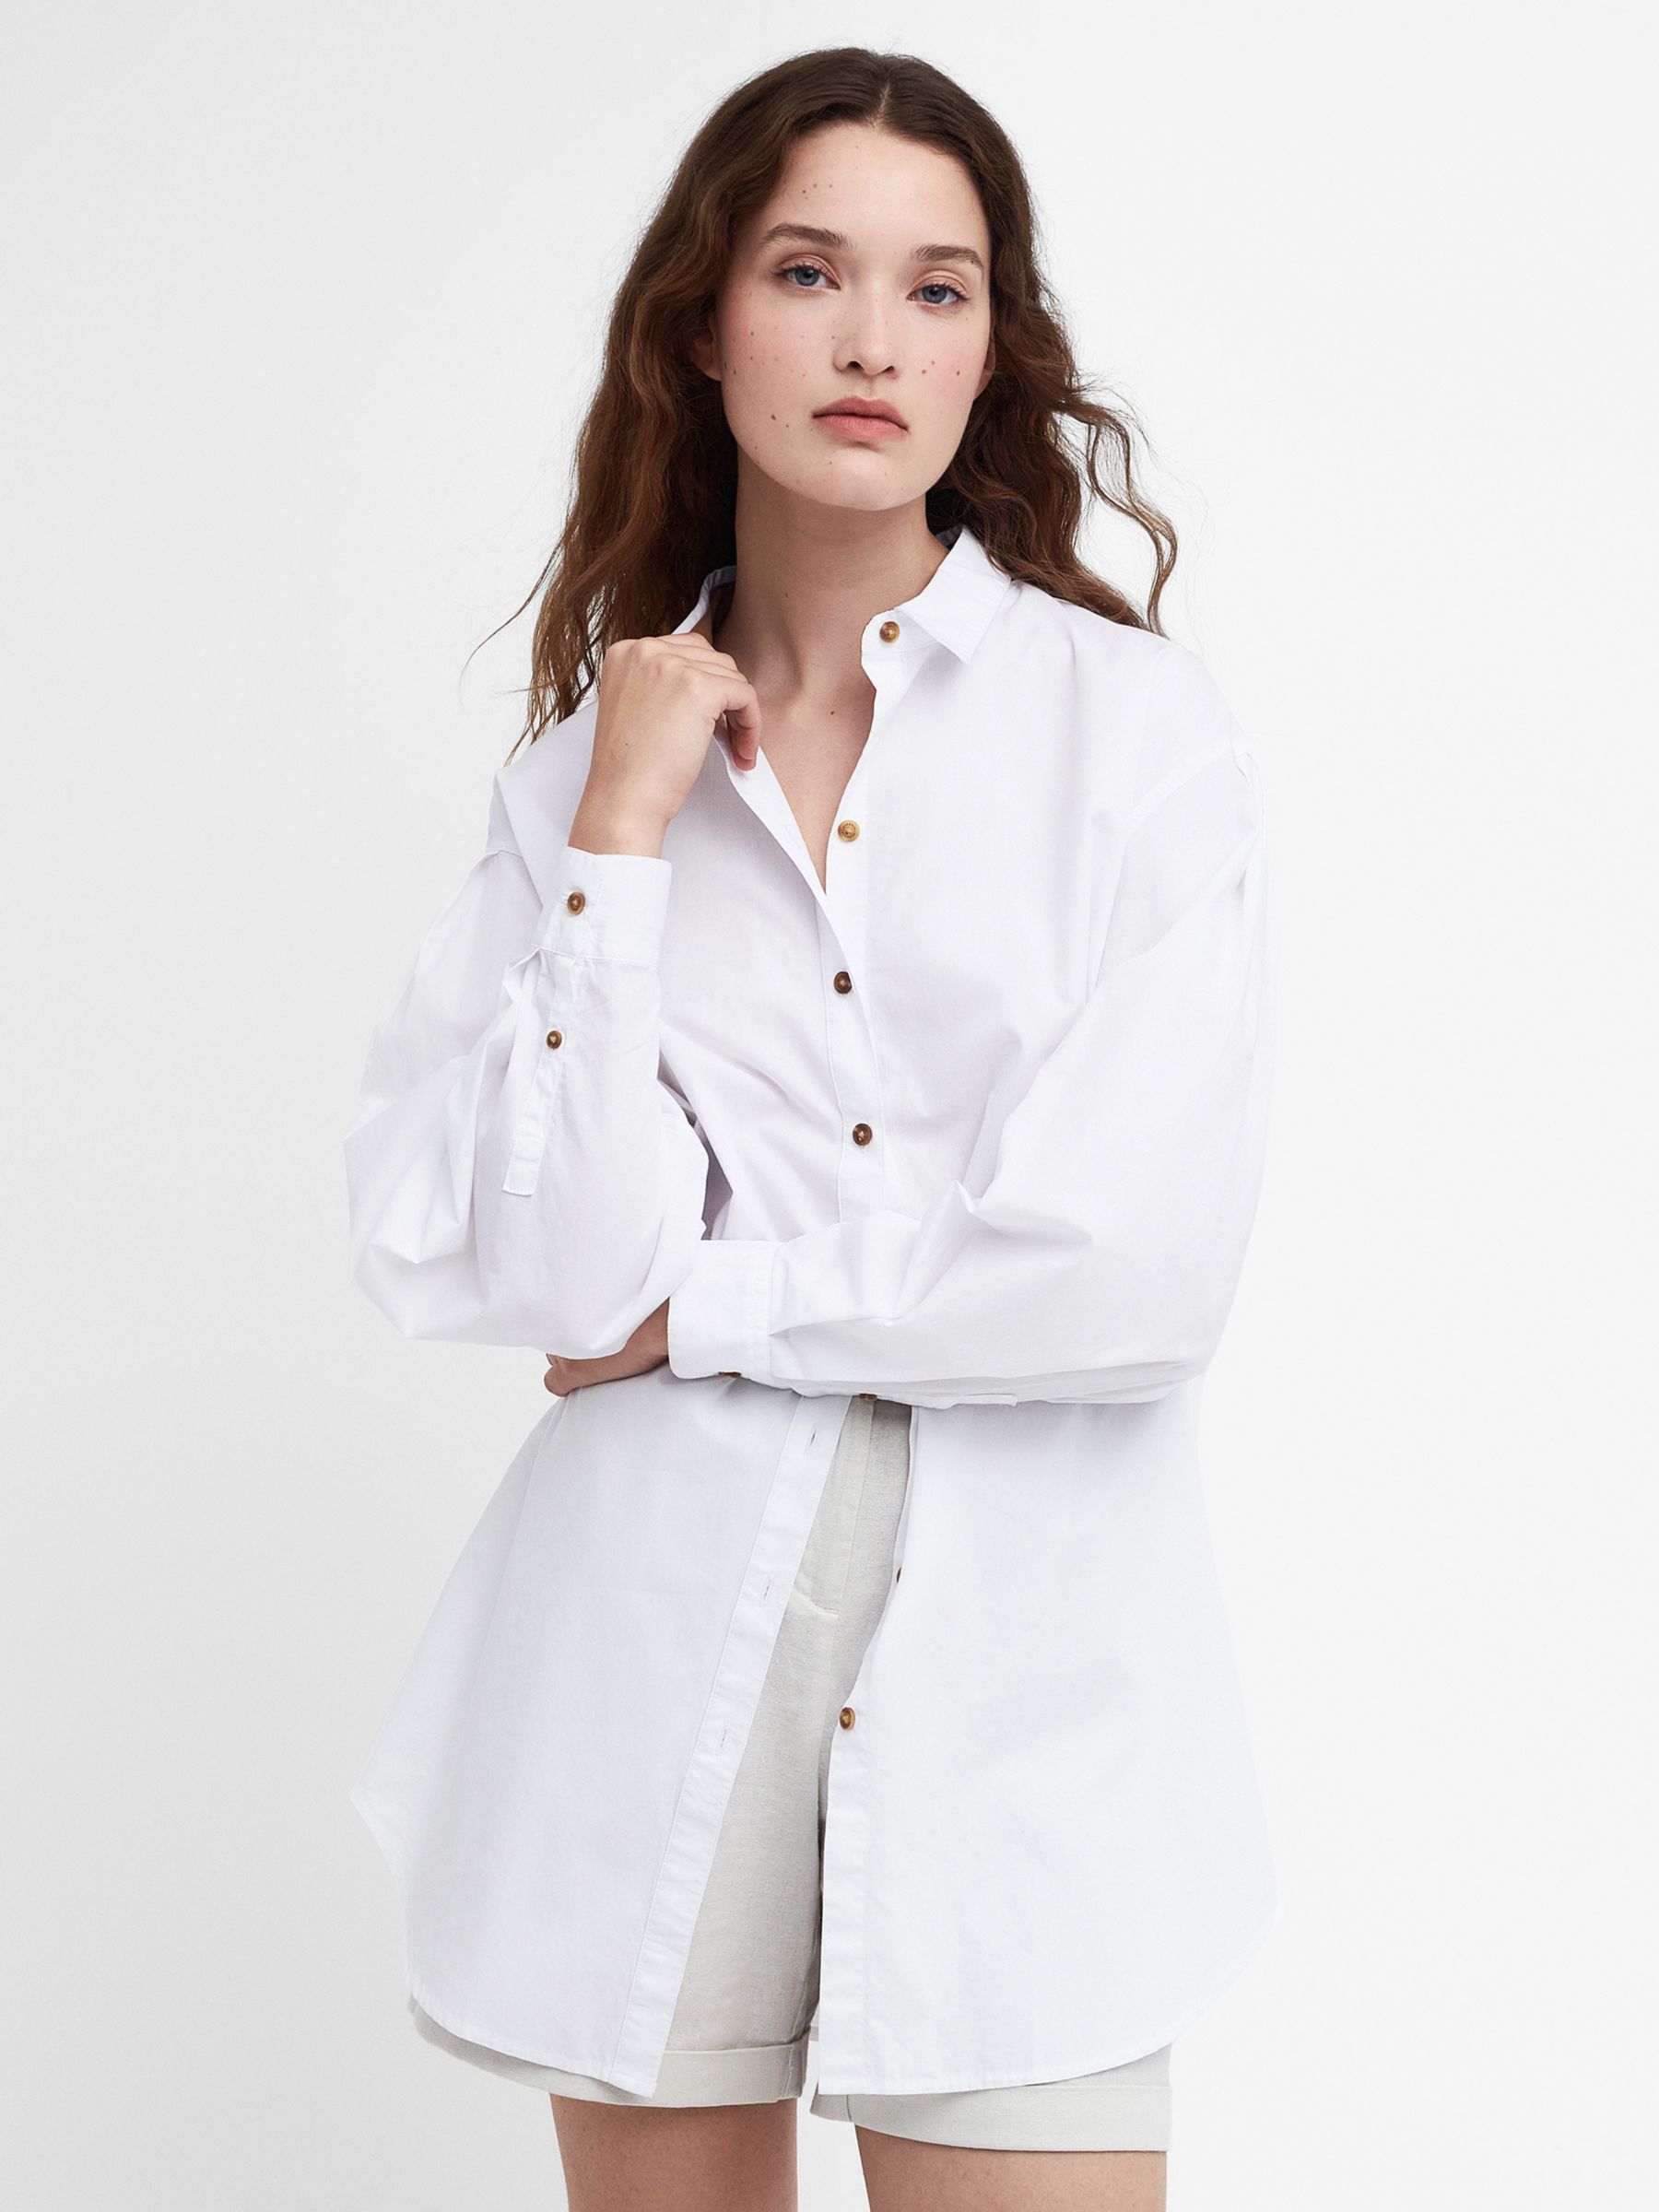 Barbour Catherine Oversized Cotton Shirt, White at John Lewis & Partners